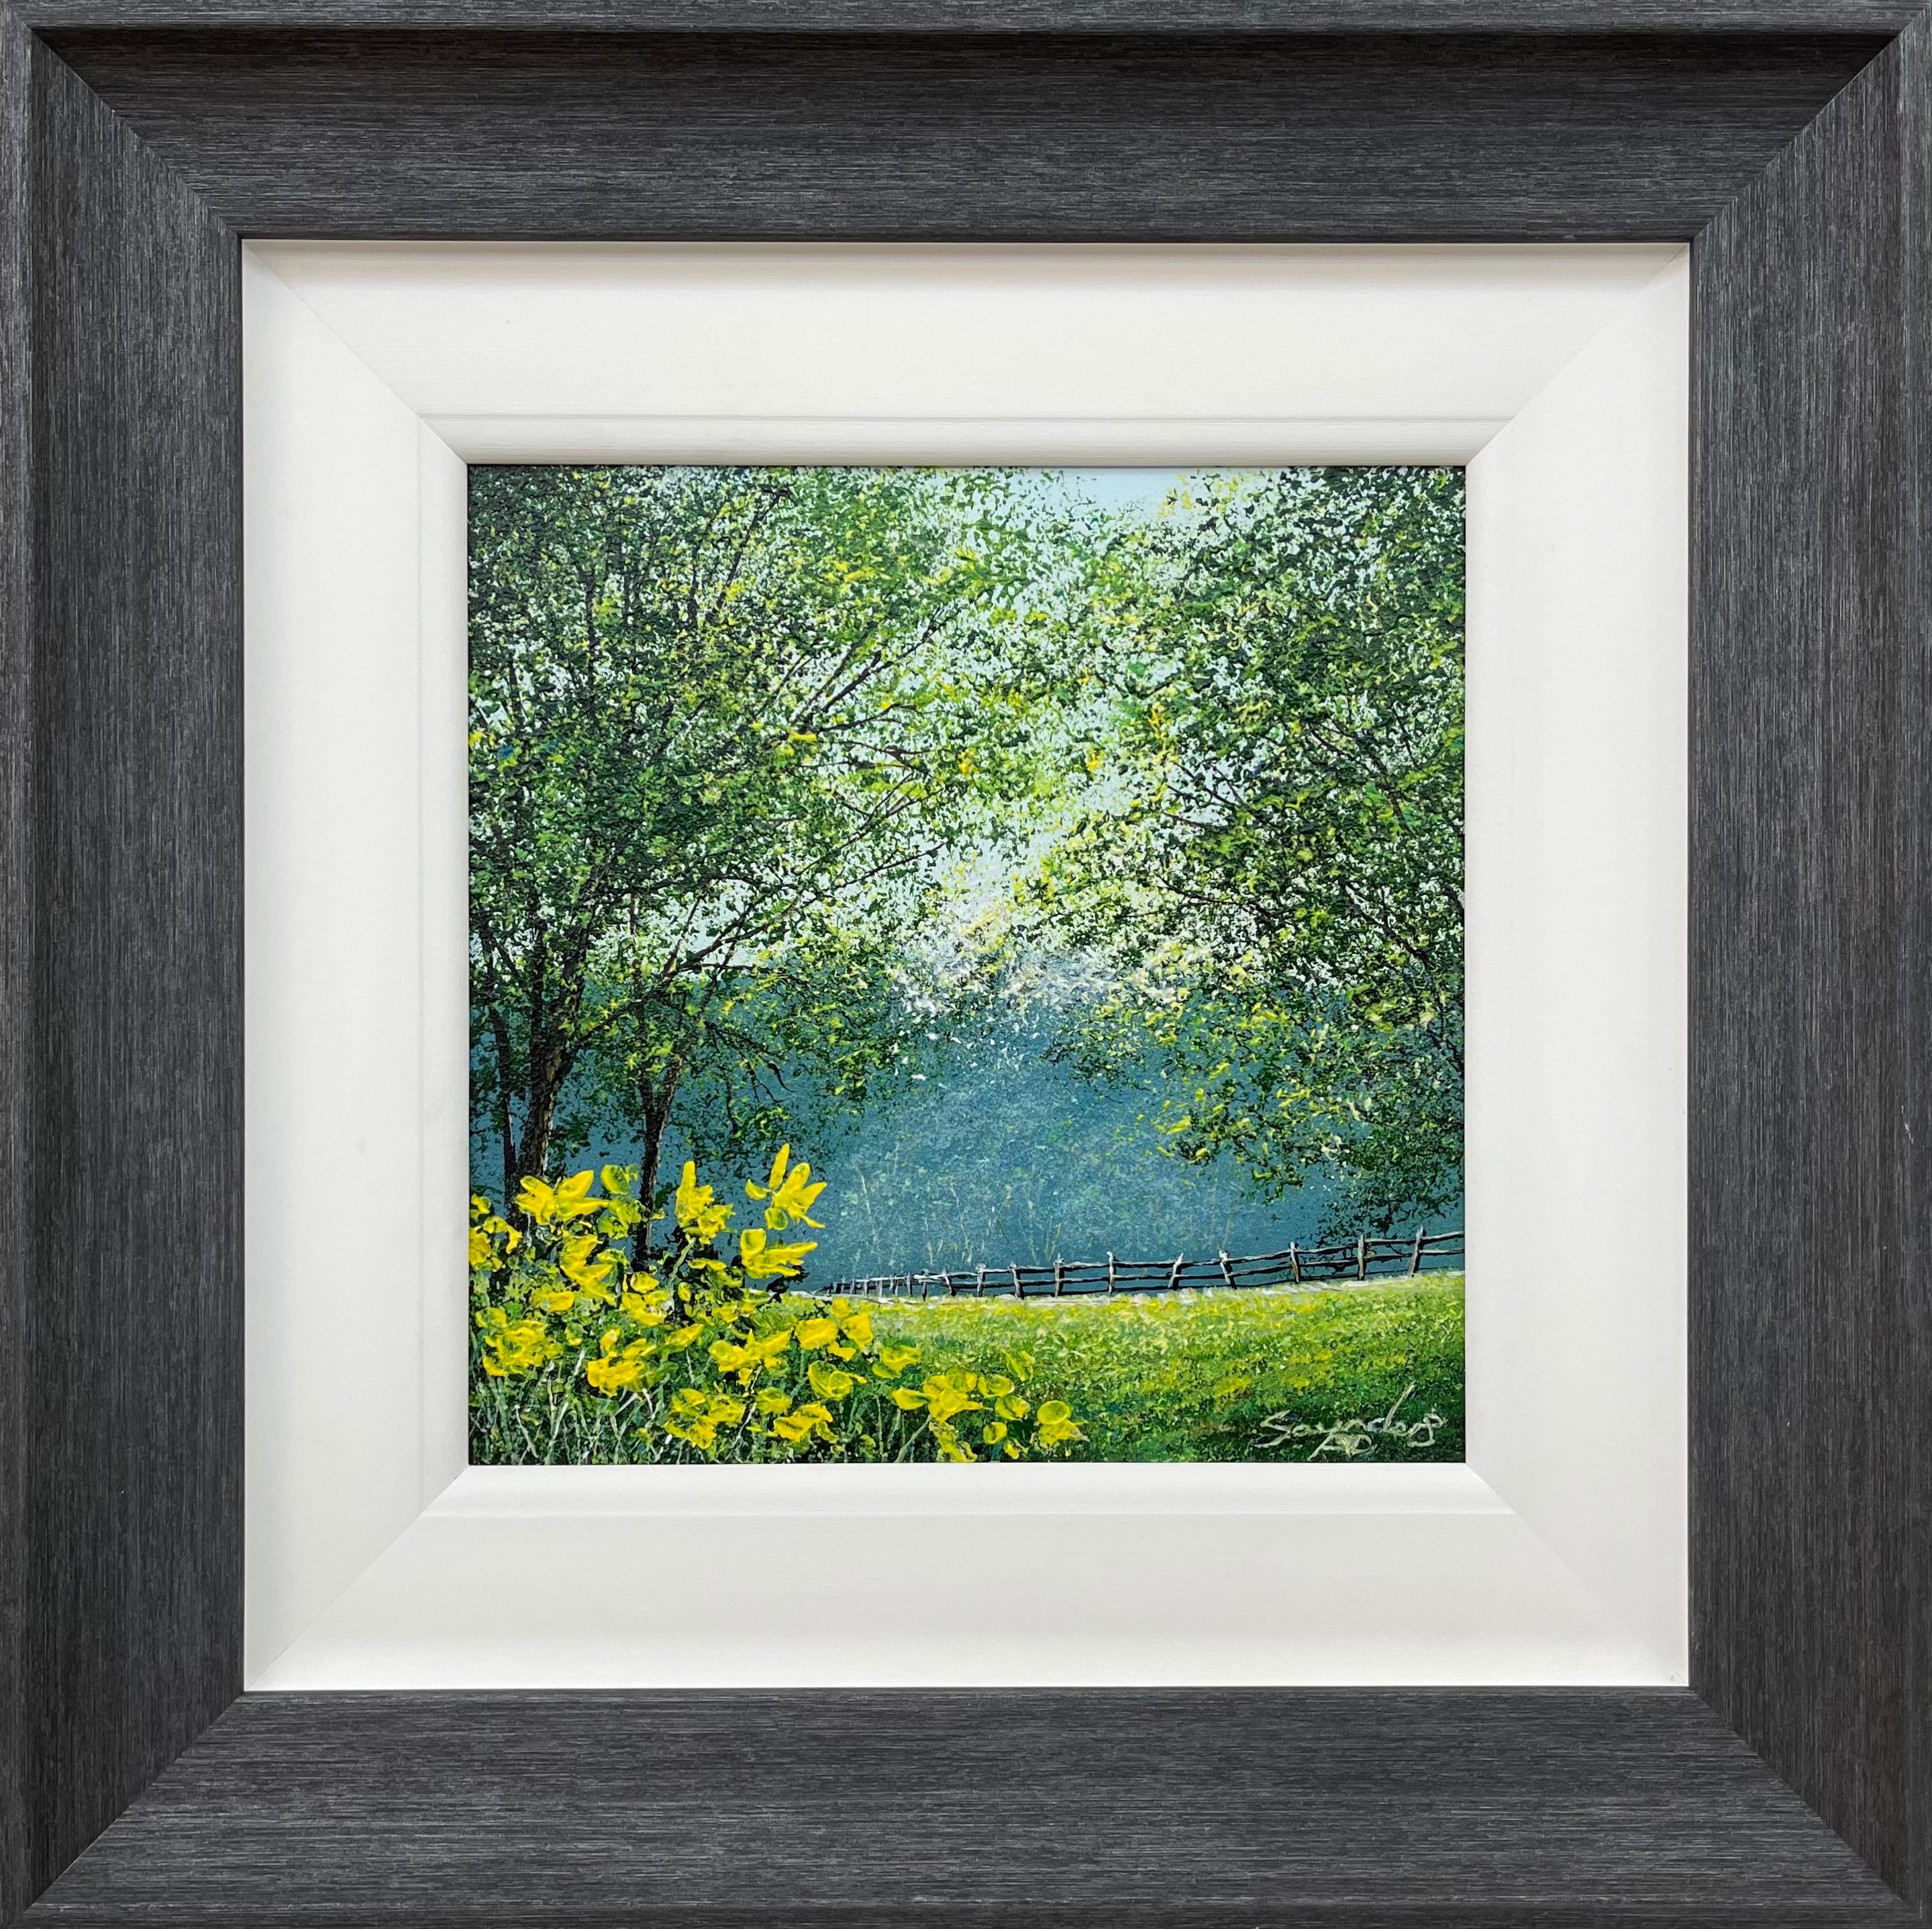 Andy Saunders Landscape Painting - Daffodil Woods by Contemporary Irish Artist 